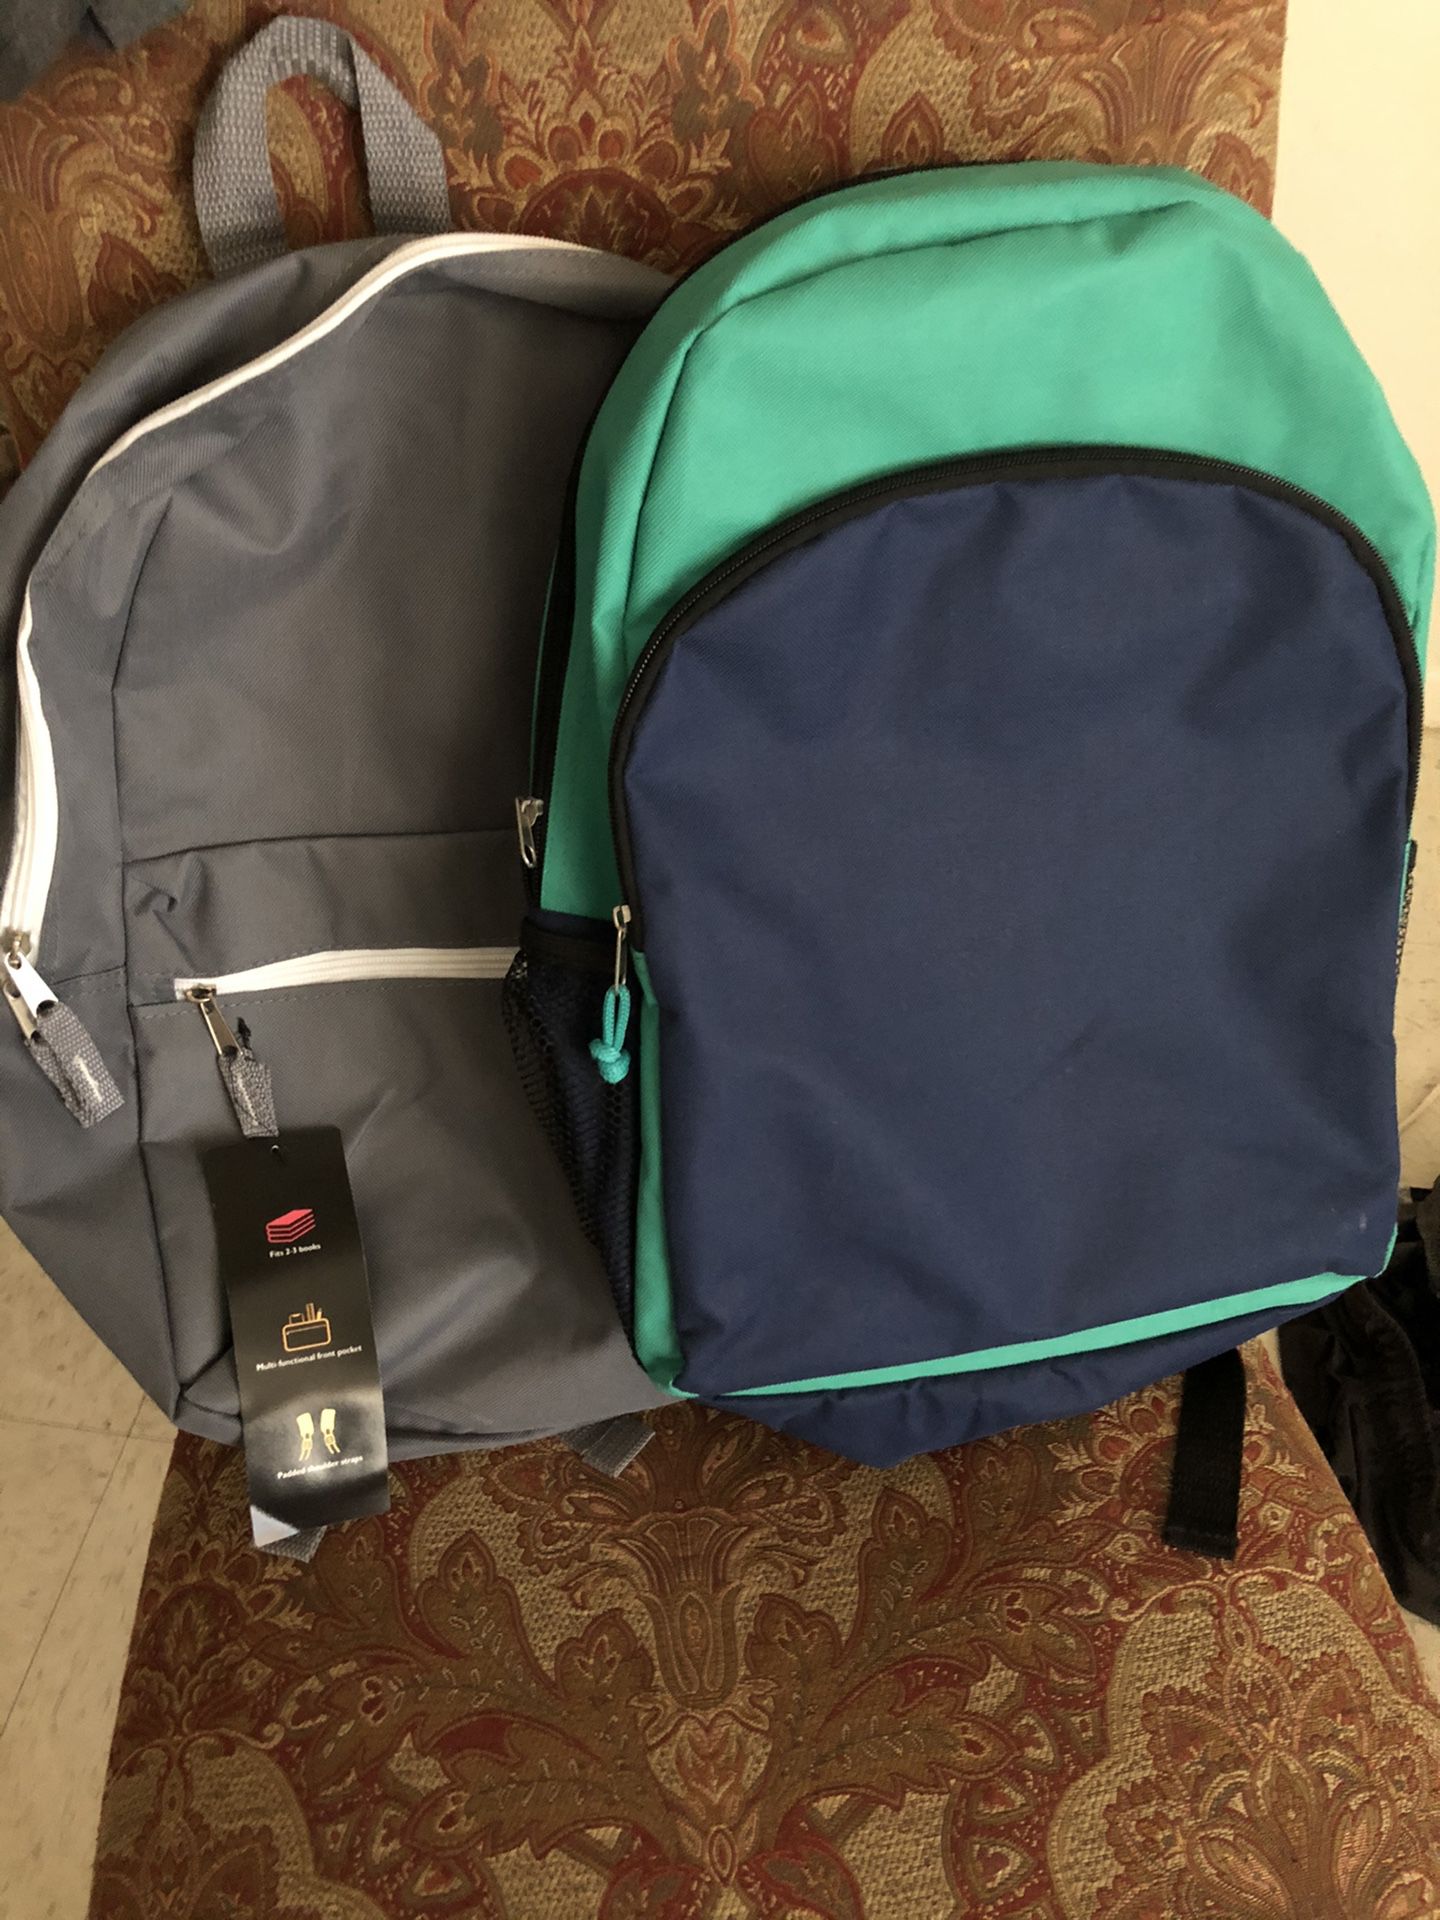 2 brand new book bags